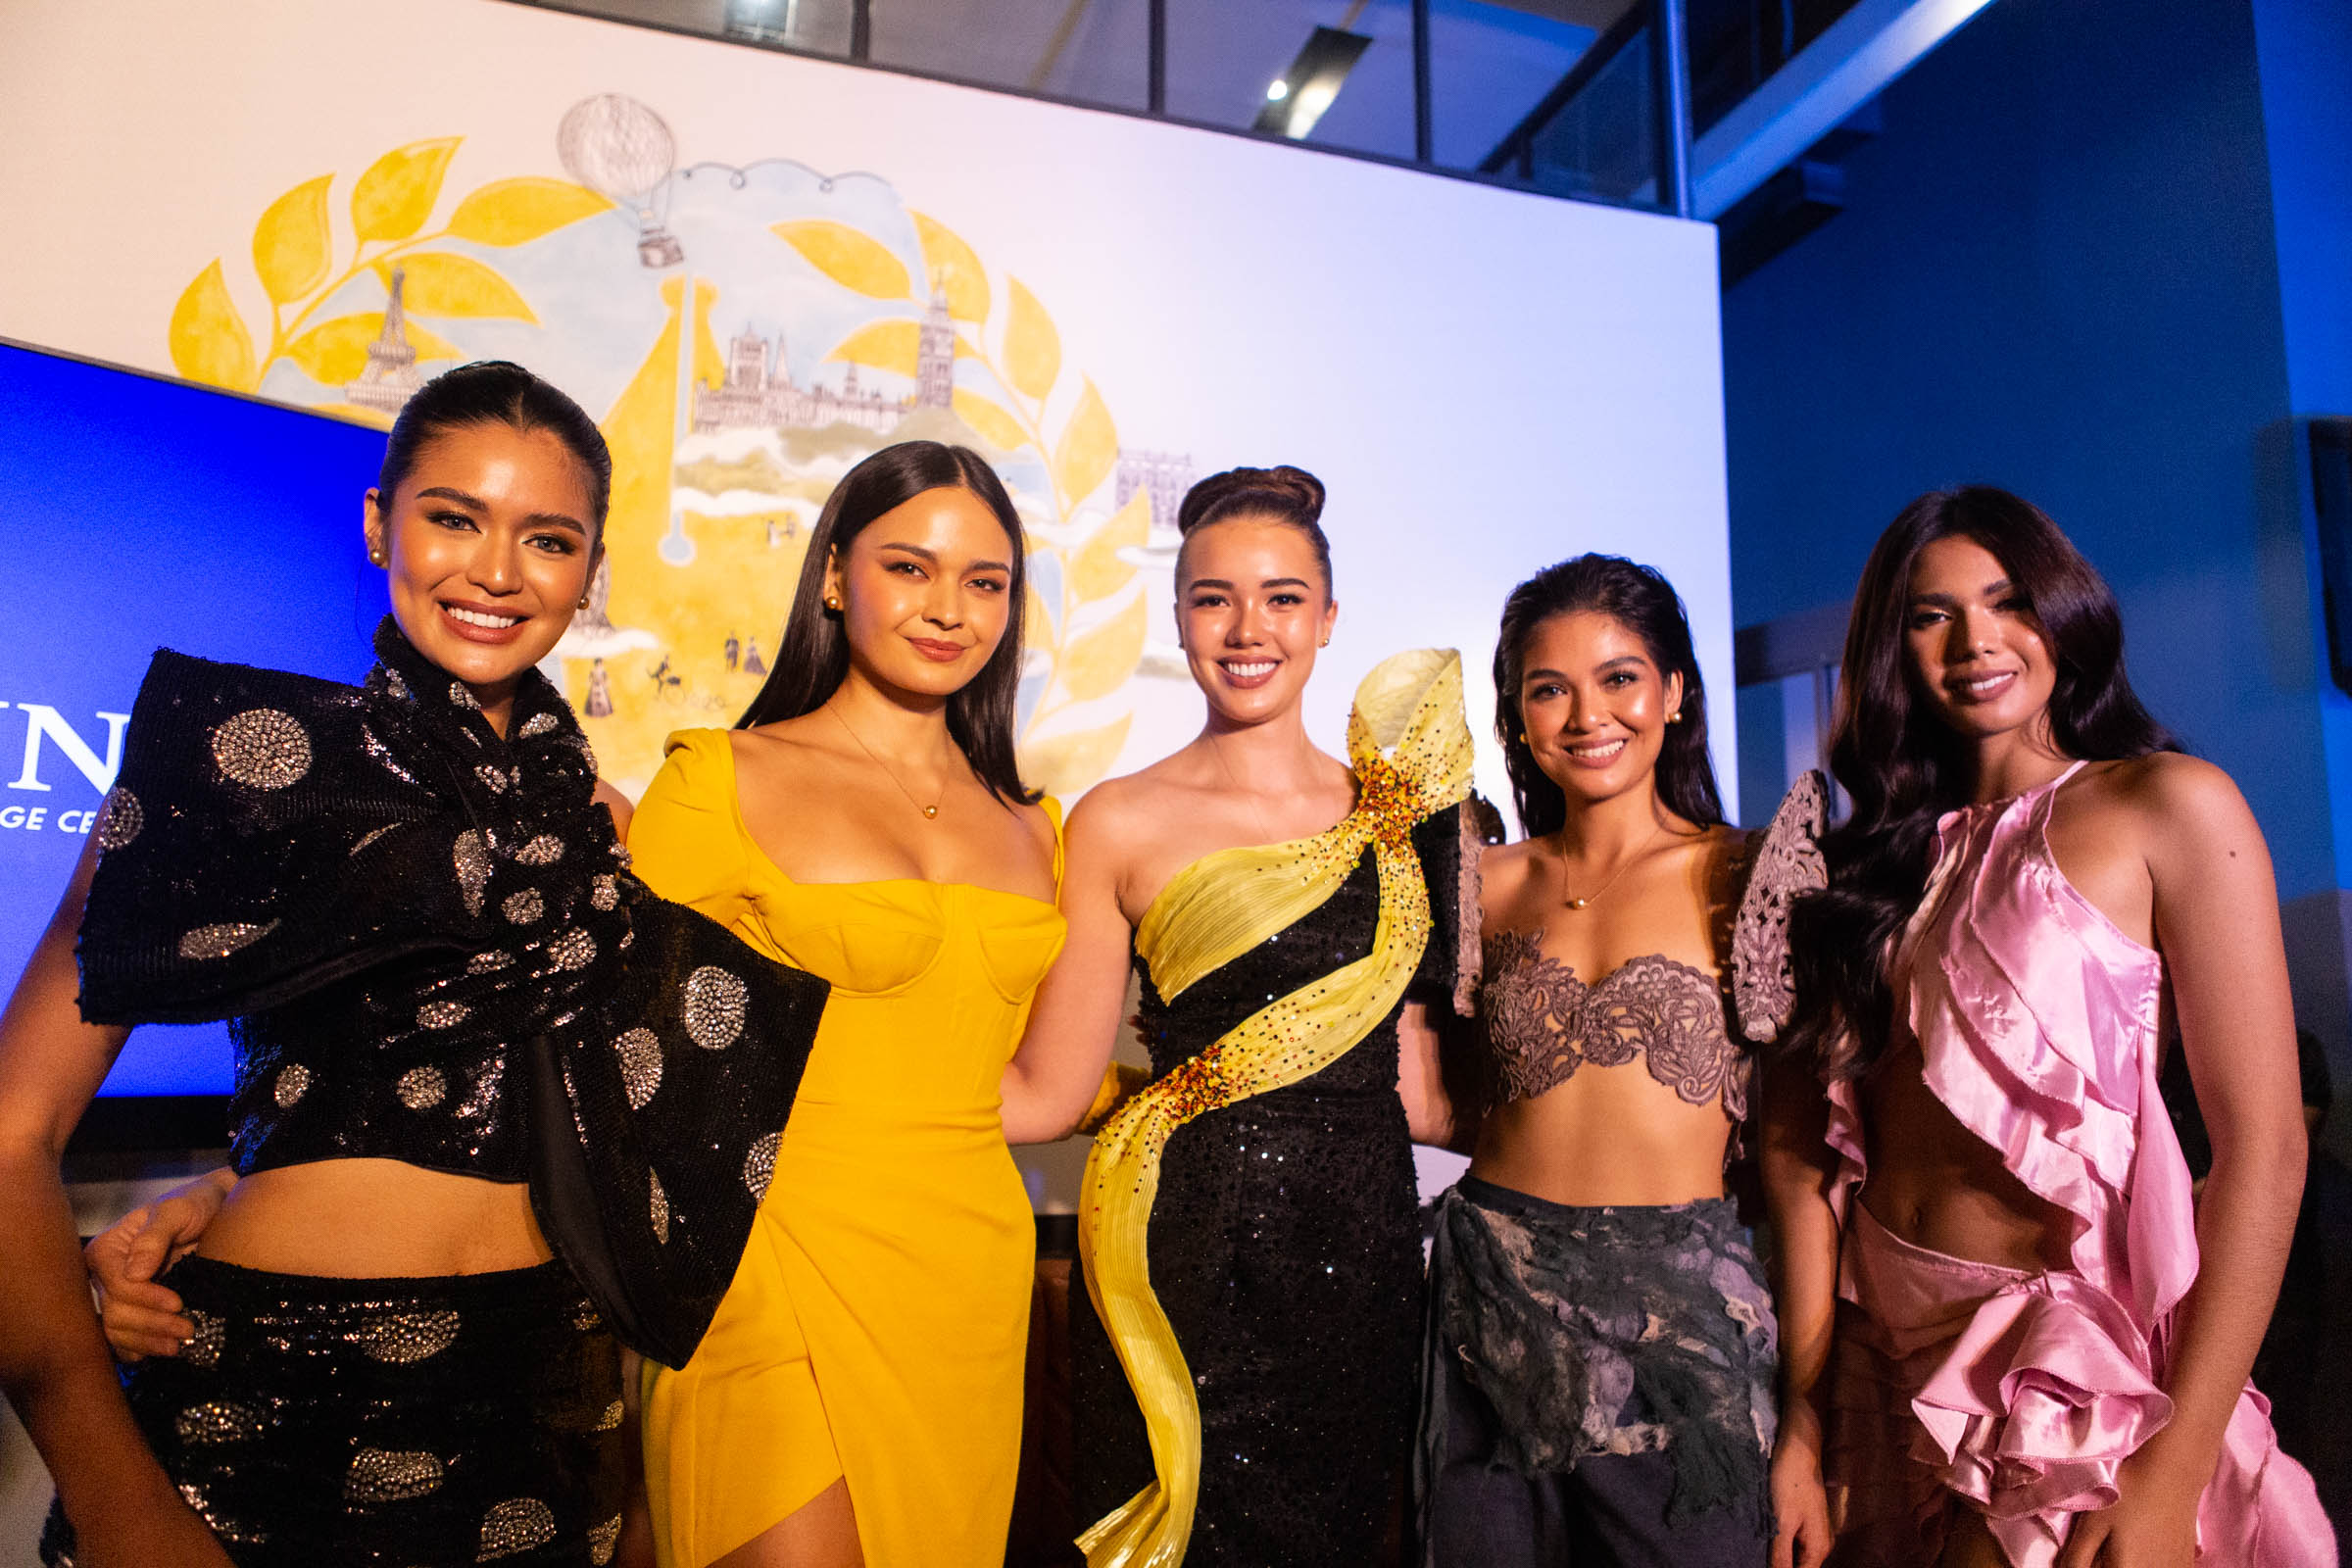 Swimsuit-less beauty contest that puts spotlight on the Philippines launched